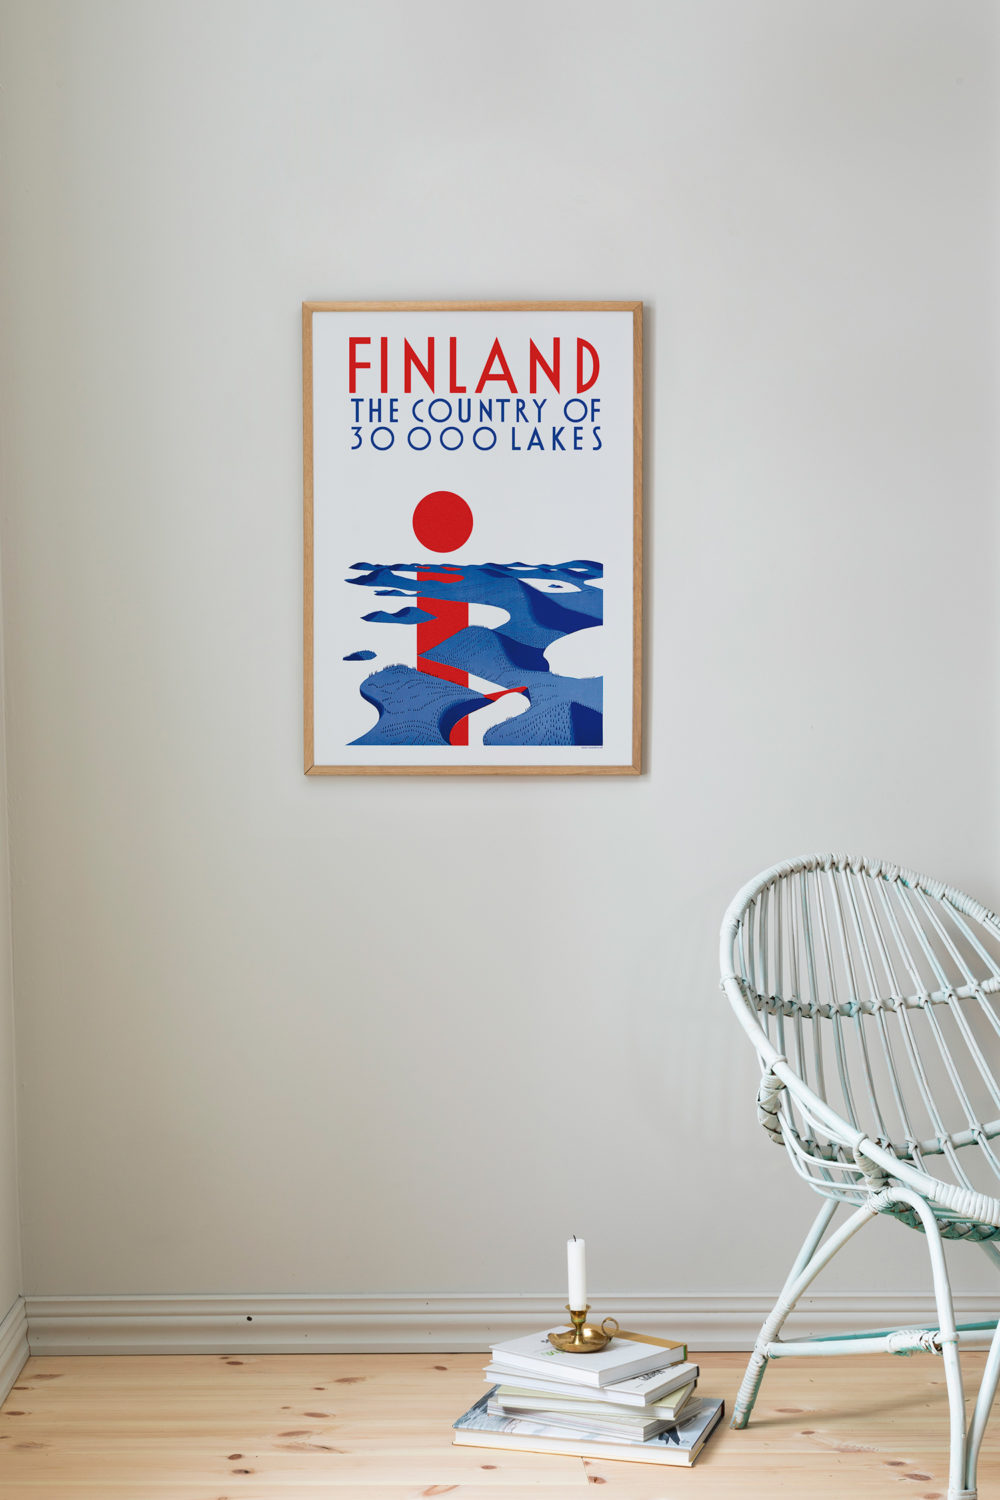 Poster of Finland, the country of 30 000 lakes